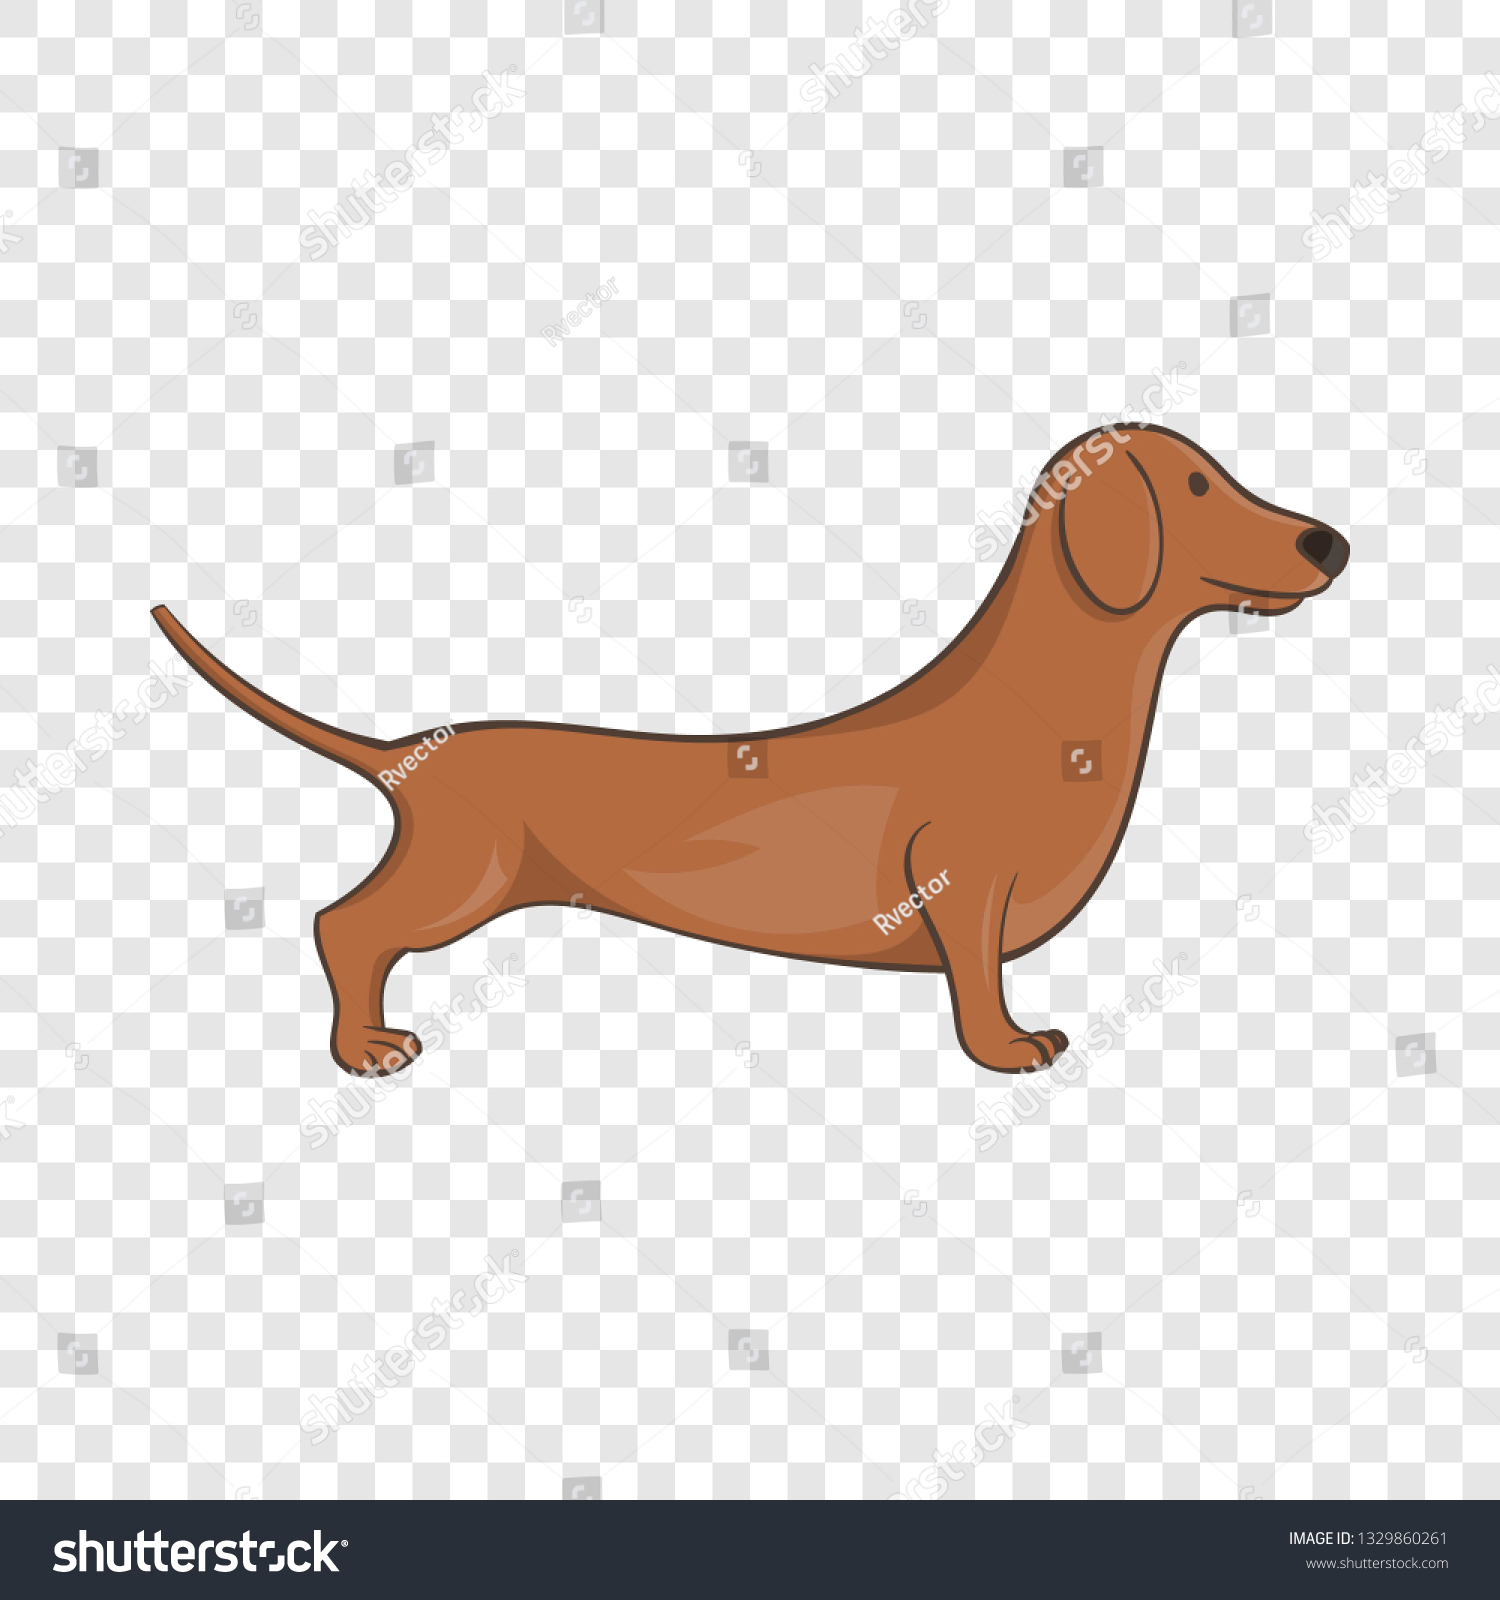 SVG of Brown dachshund dog icon in cartoon style on a background for any web design  svg